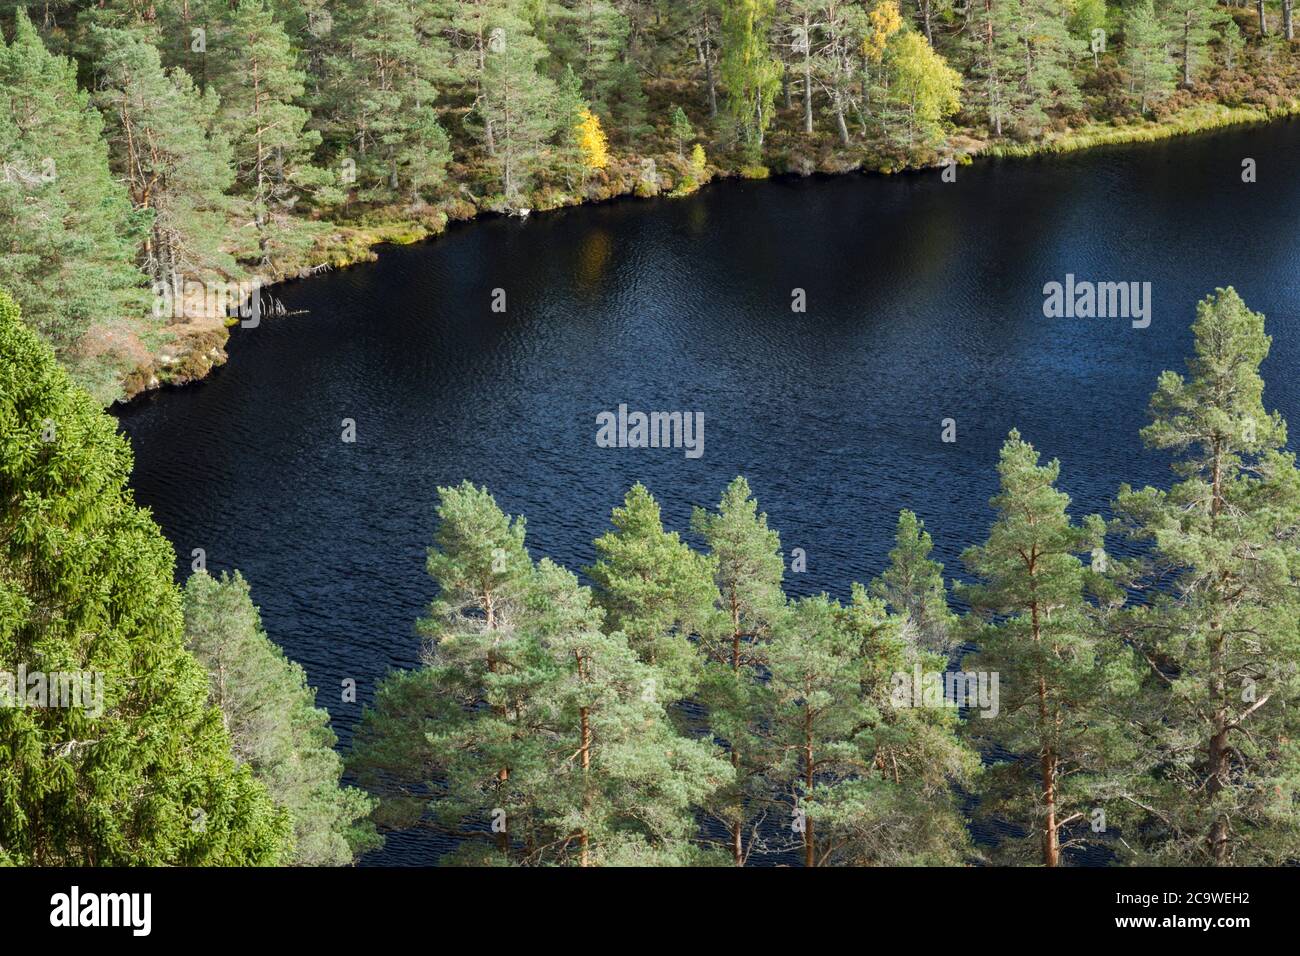 Elevated view over Uath Lochan looking down into the water of the lochan surrounded by pine forest Stock Photo